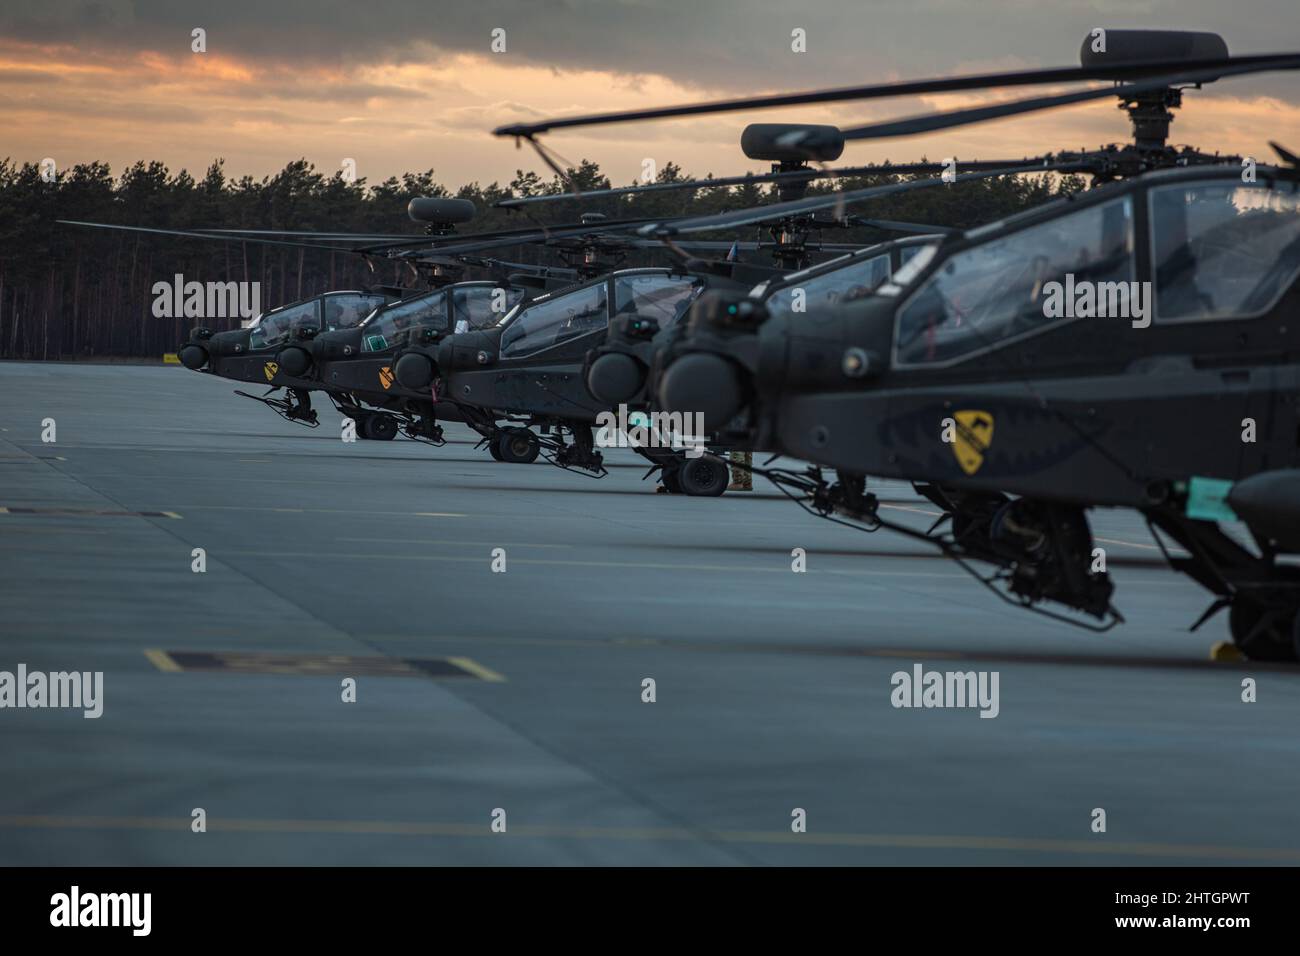 Lask, Poland. 25 February, 2022. U.S. Army AH64 Apache attack helicopters with the 7th Squadron, 17th Cavalry Regiment of the 1st Air Cavalry Brigade on the ramp at Lask Air Base, February 25, 2022 in Lask, Poland. The U.S. has increased NATO forces in the region to counter the Russia threat against Ukraine.  Credit: Sgt. Agustín Montanez/U.S Army/Alamy Live News Stock Photo